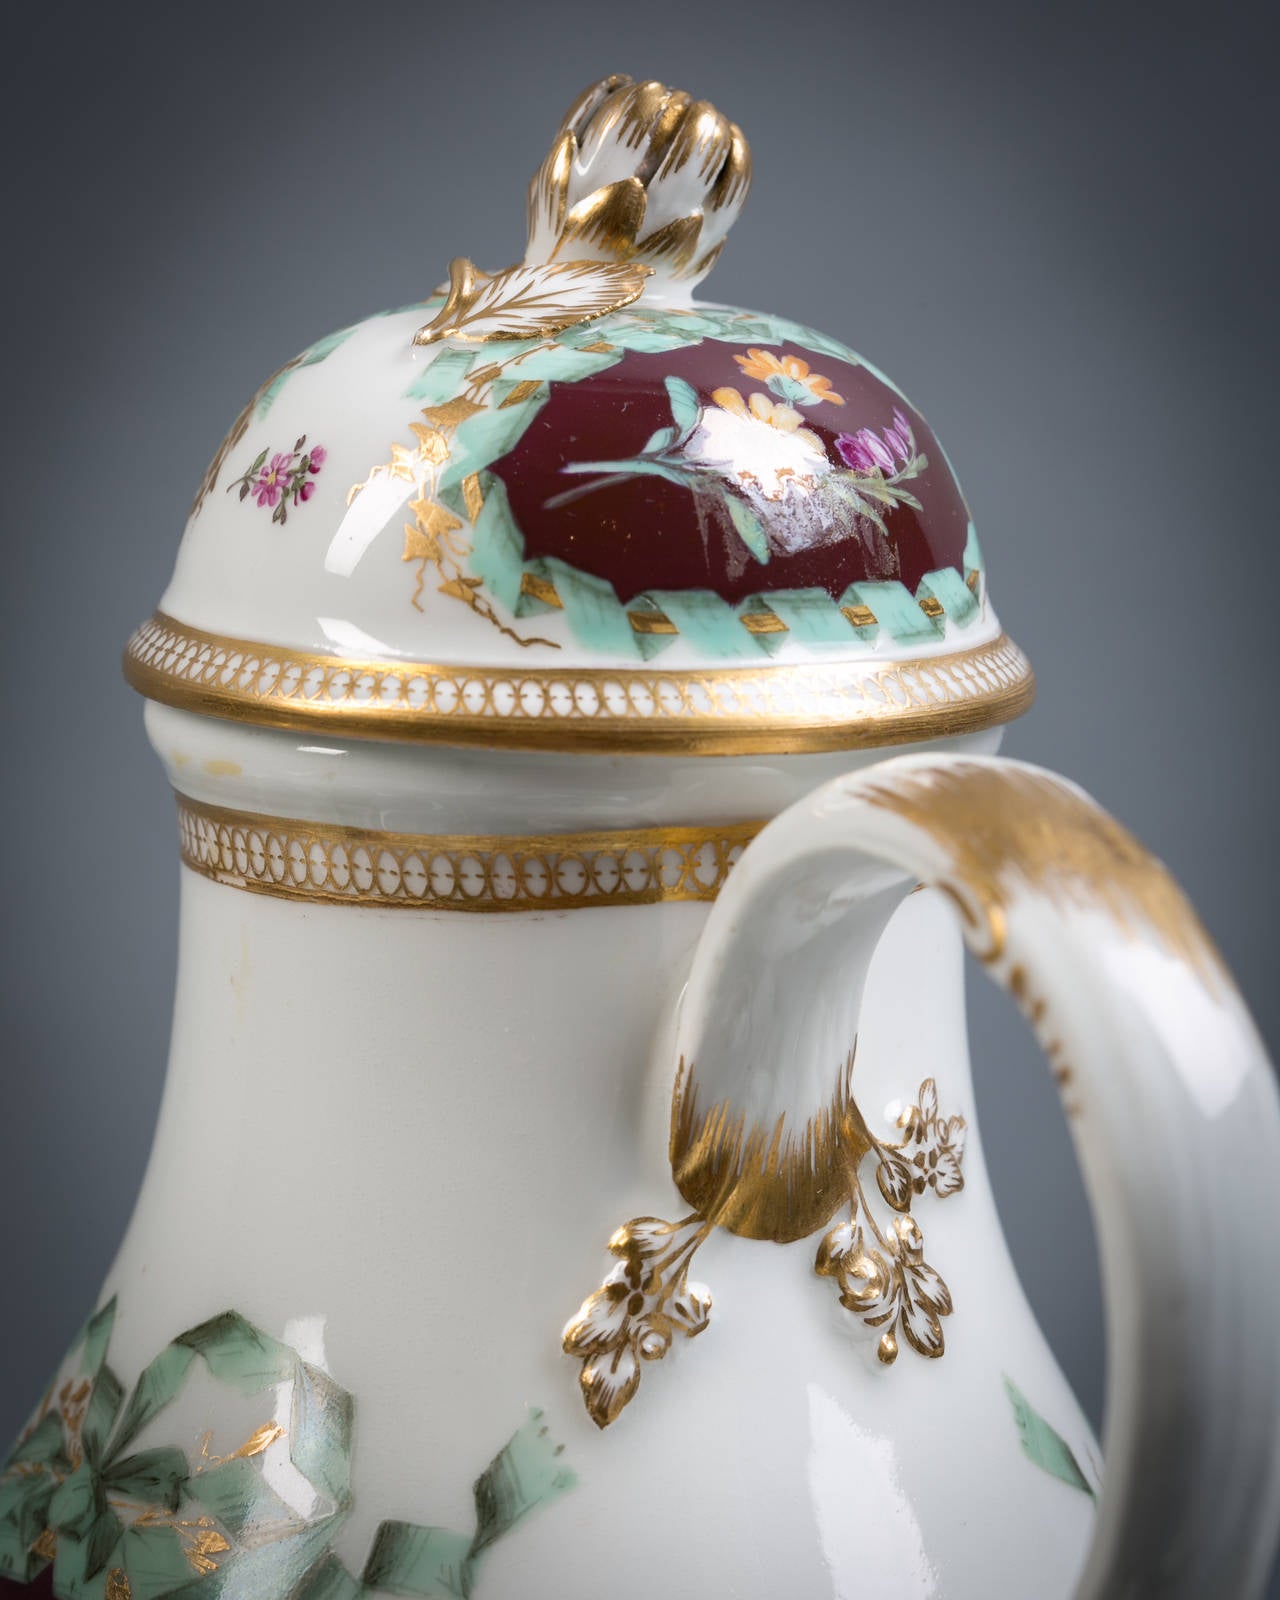 German Meissen 'Marcolini' Porcelain Tea and Coffee Service, circa 1790 In Good Condition For Sale In New York, NY